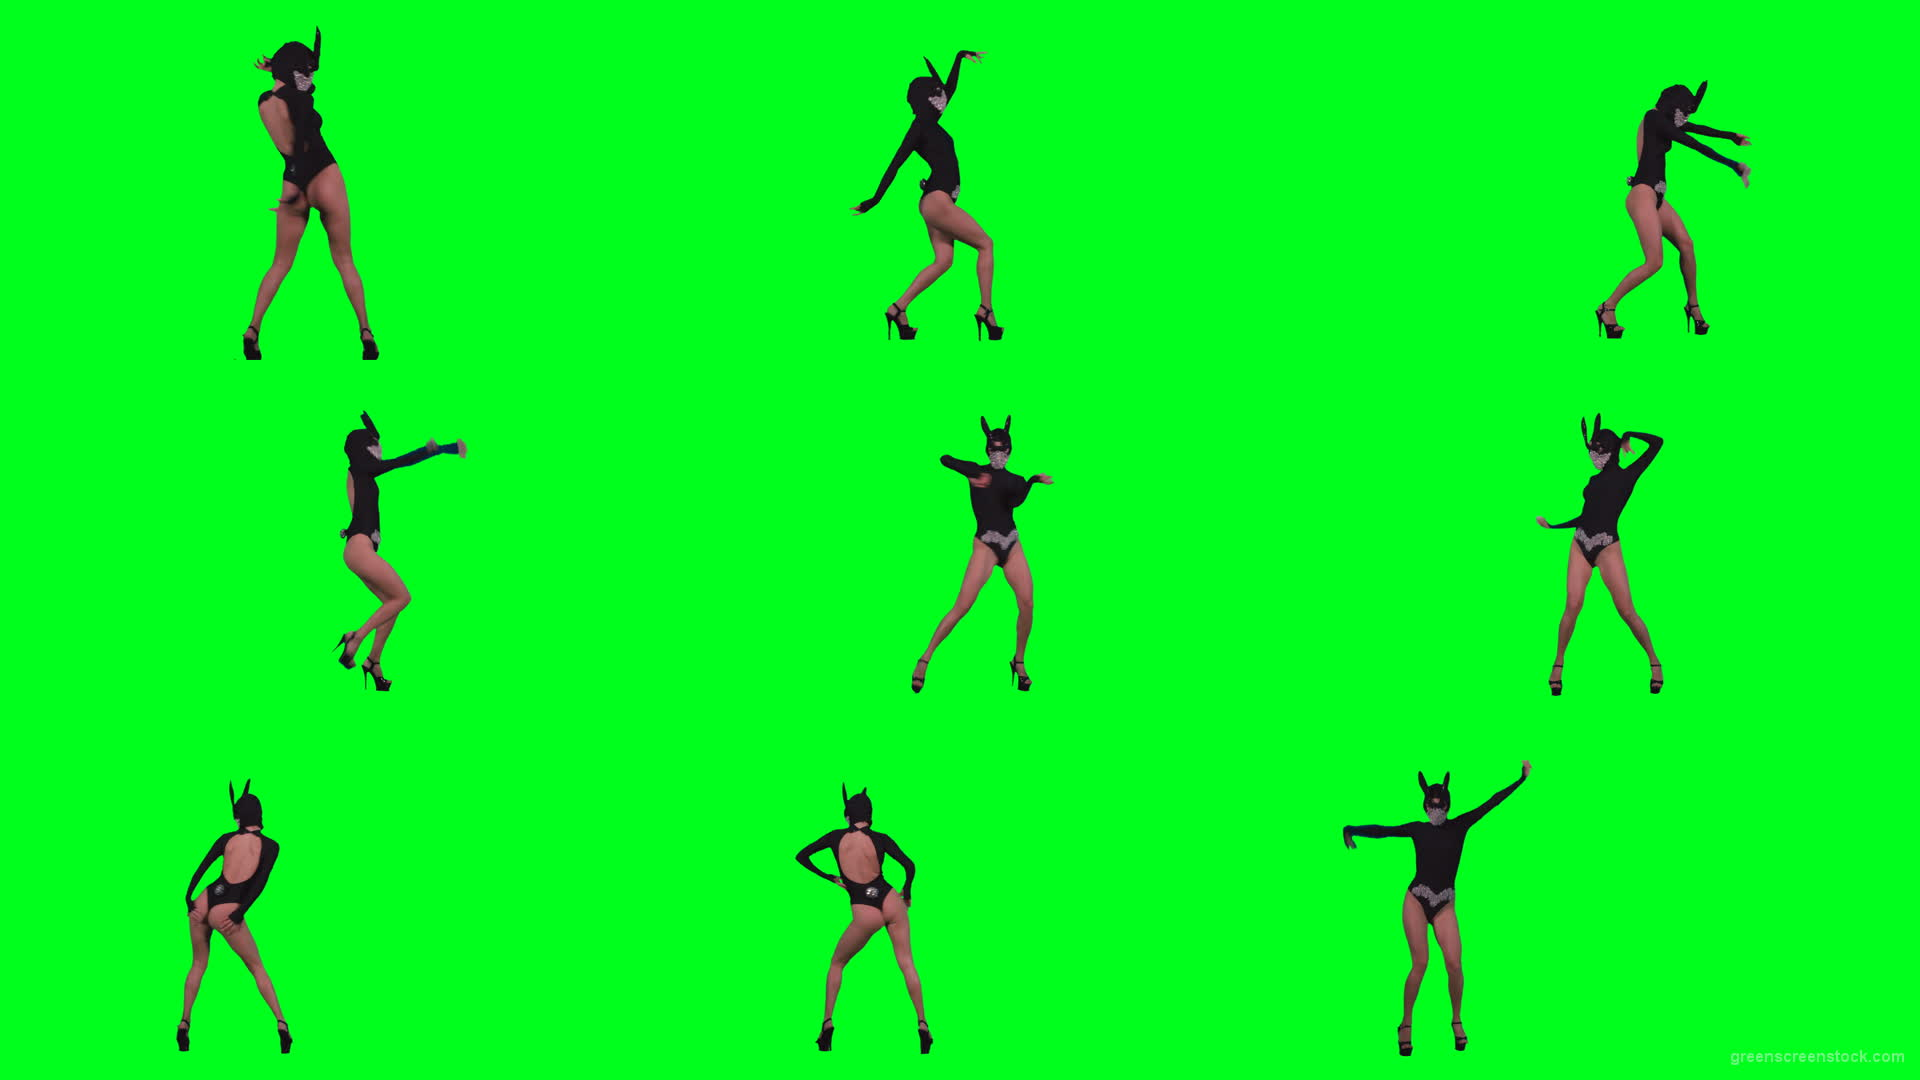 Amazing-black-banny-rabbit-girl-dancing-go-go-isolated-on-green-screen-RAVE-Video-Footage-1920 Green Screen Stock